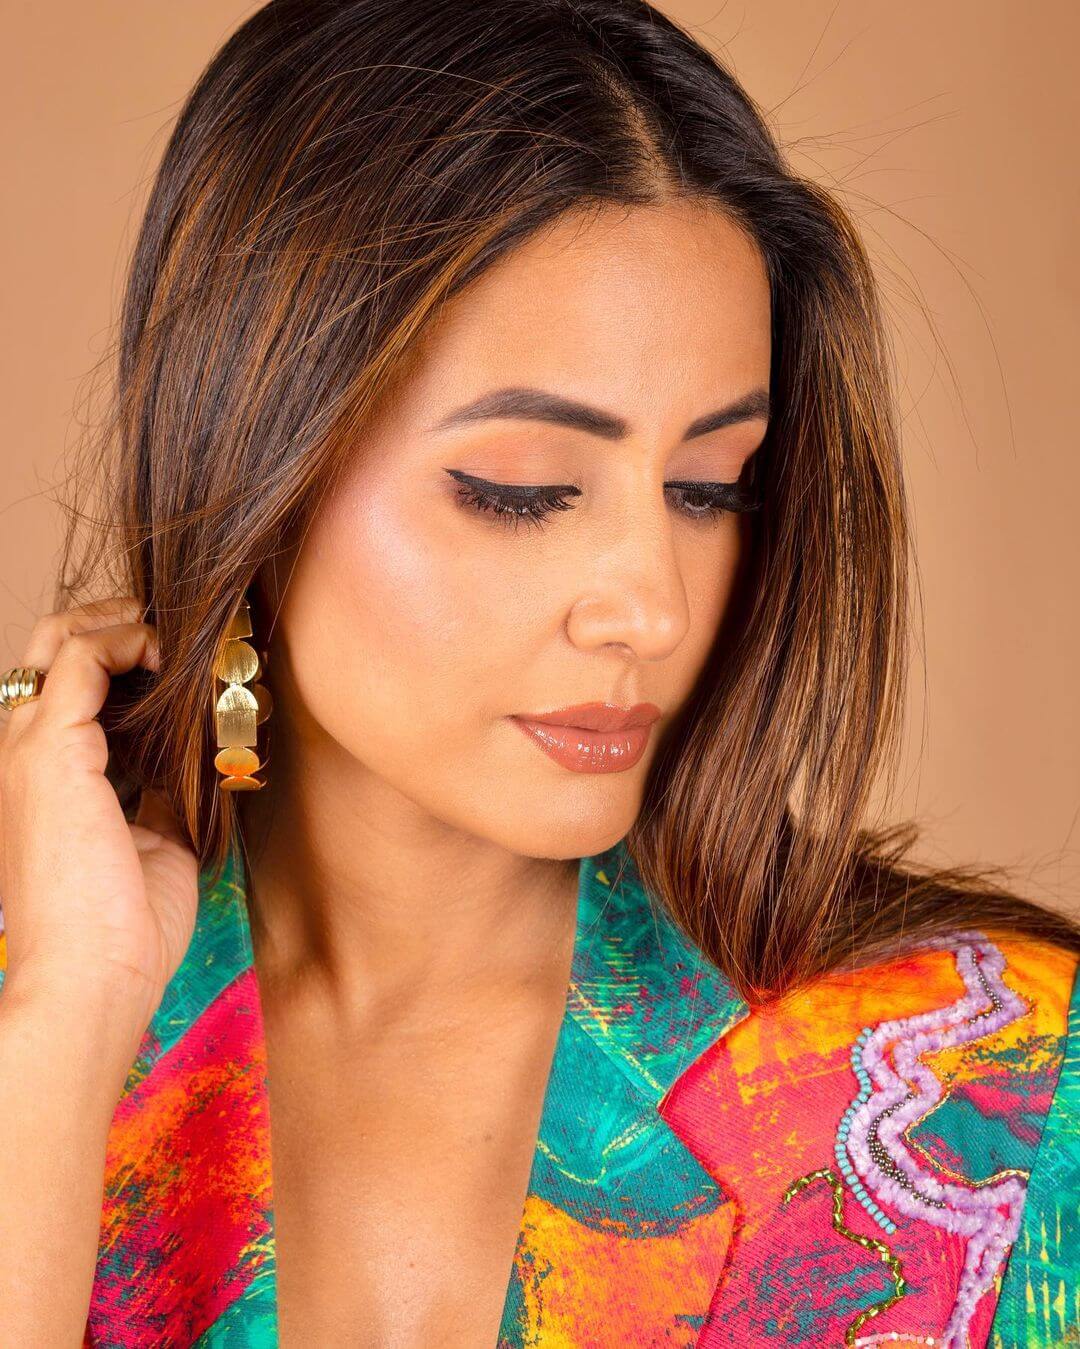 Hina Khan Goes Chic In Colorful Sequin Jacket Dress And Gold Hoops 846610